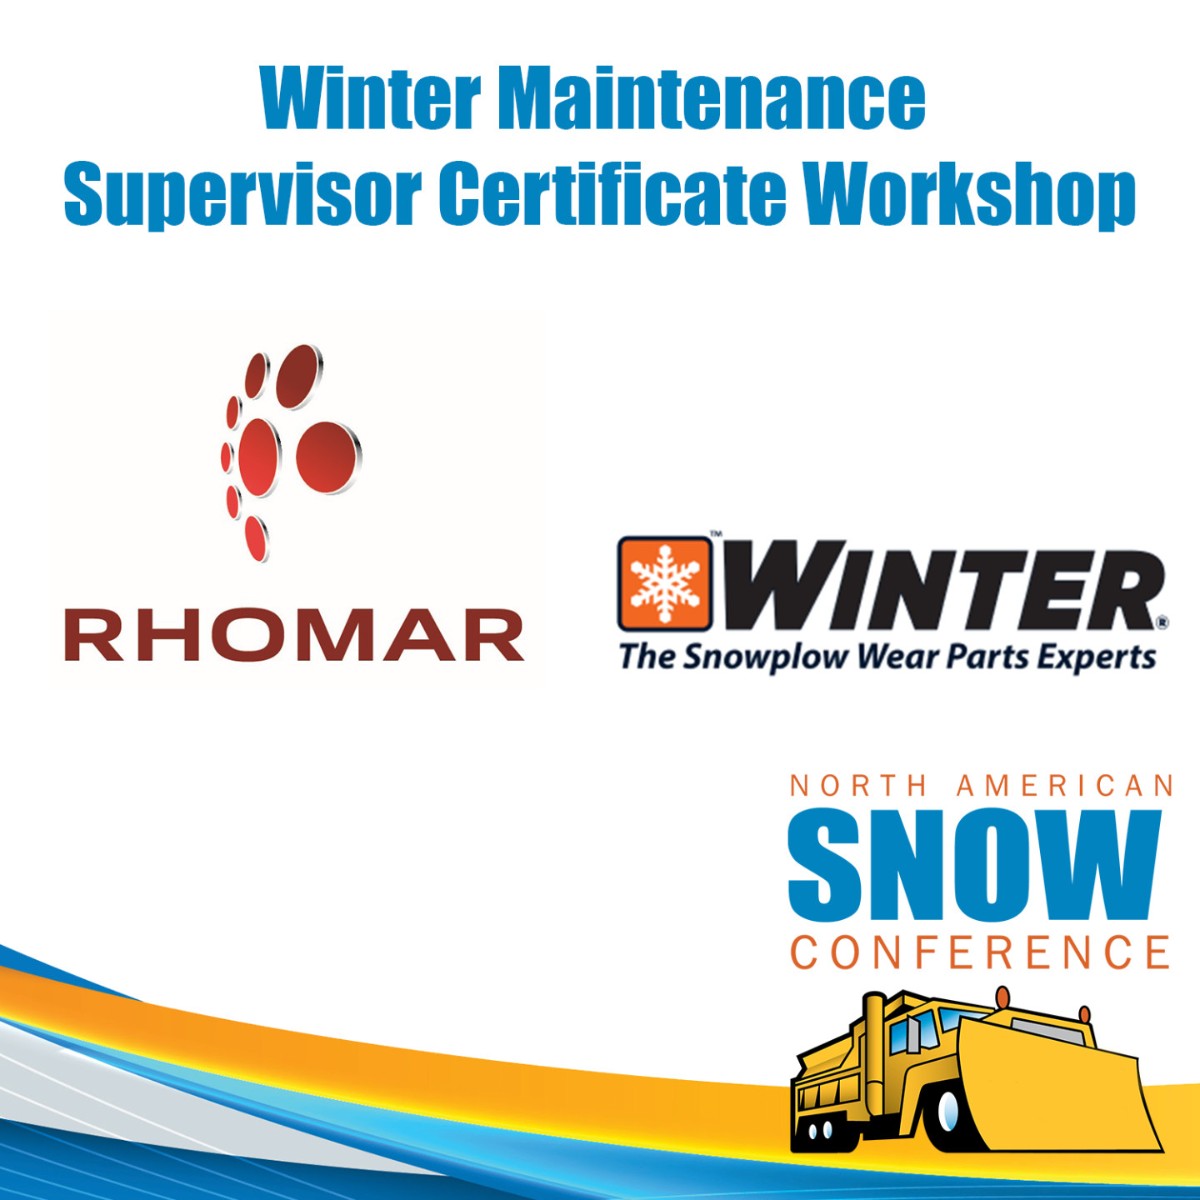 #sponsored | The Winter Maintenance Supervisor Certificate Workshop is sponsored by @WinterEqCompany (booth #623) and @rhomarind (booth #905). Let's make the roads safer for our communities this snowy season!